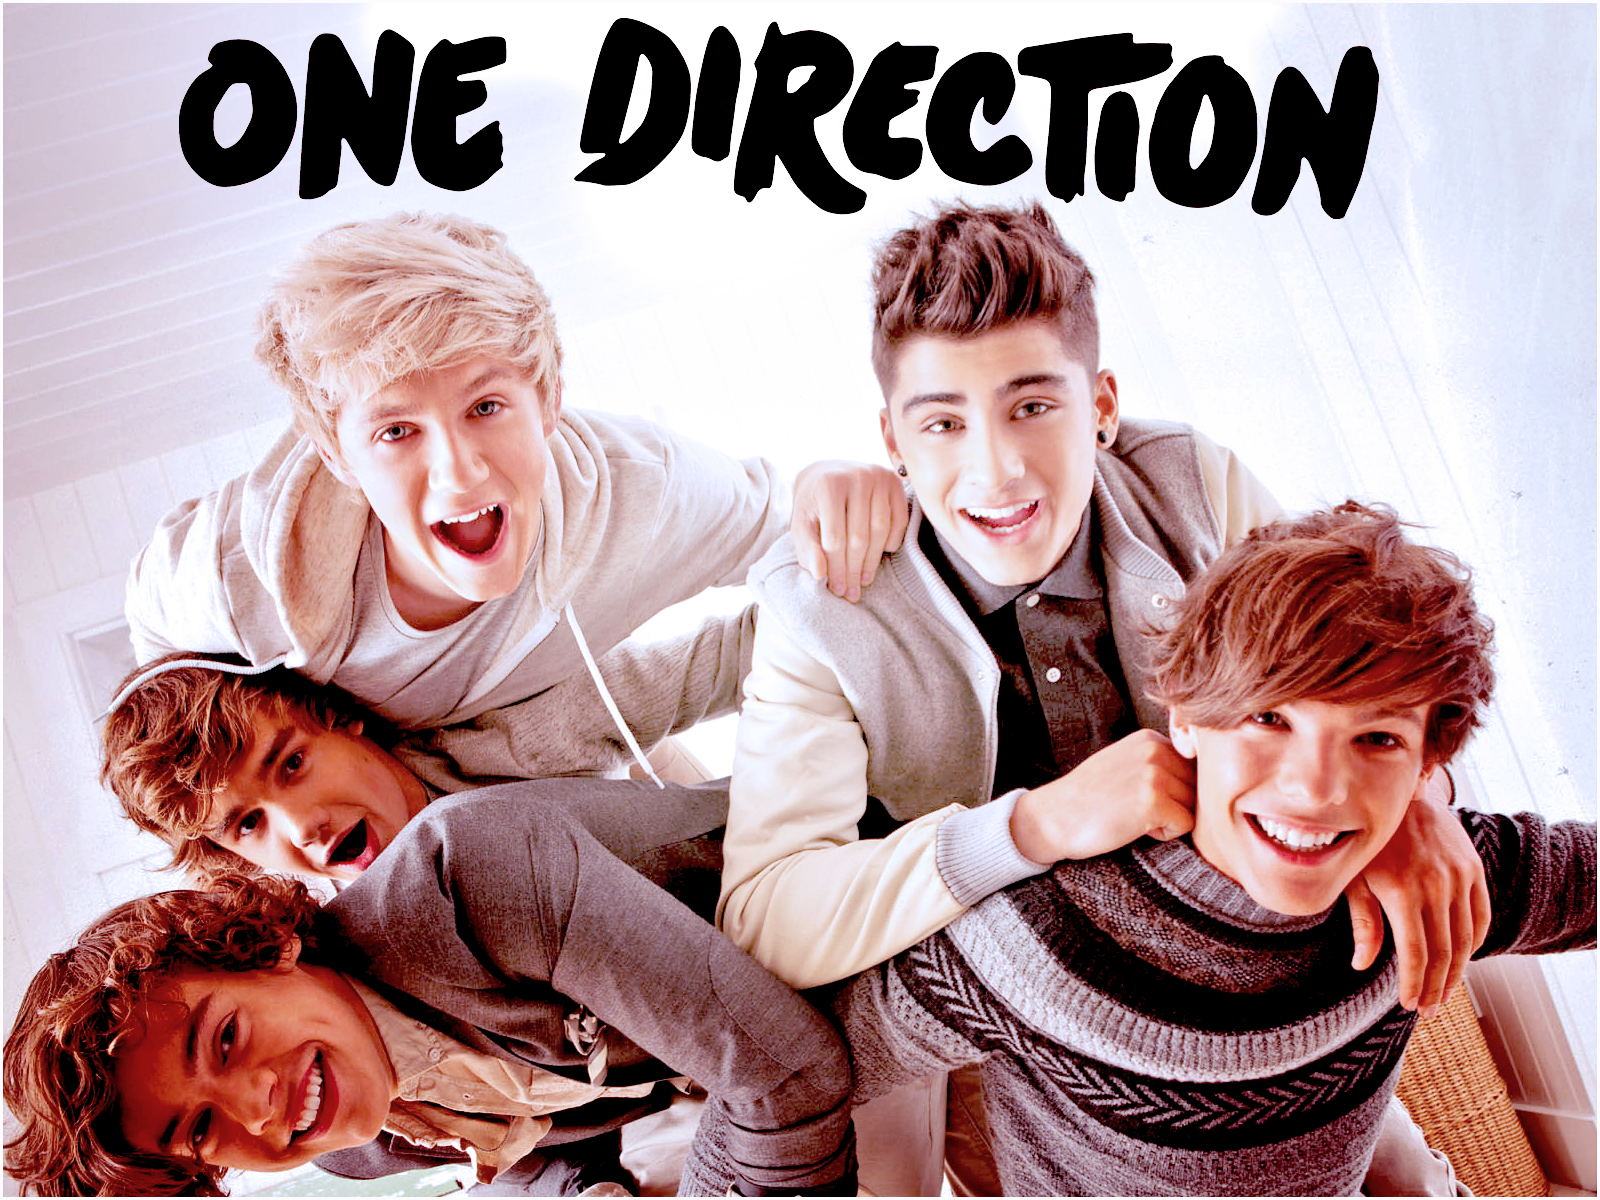 One Direction 2013 wallpaper High Quality WallpapersWallpaper 1600x1200